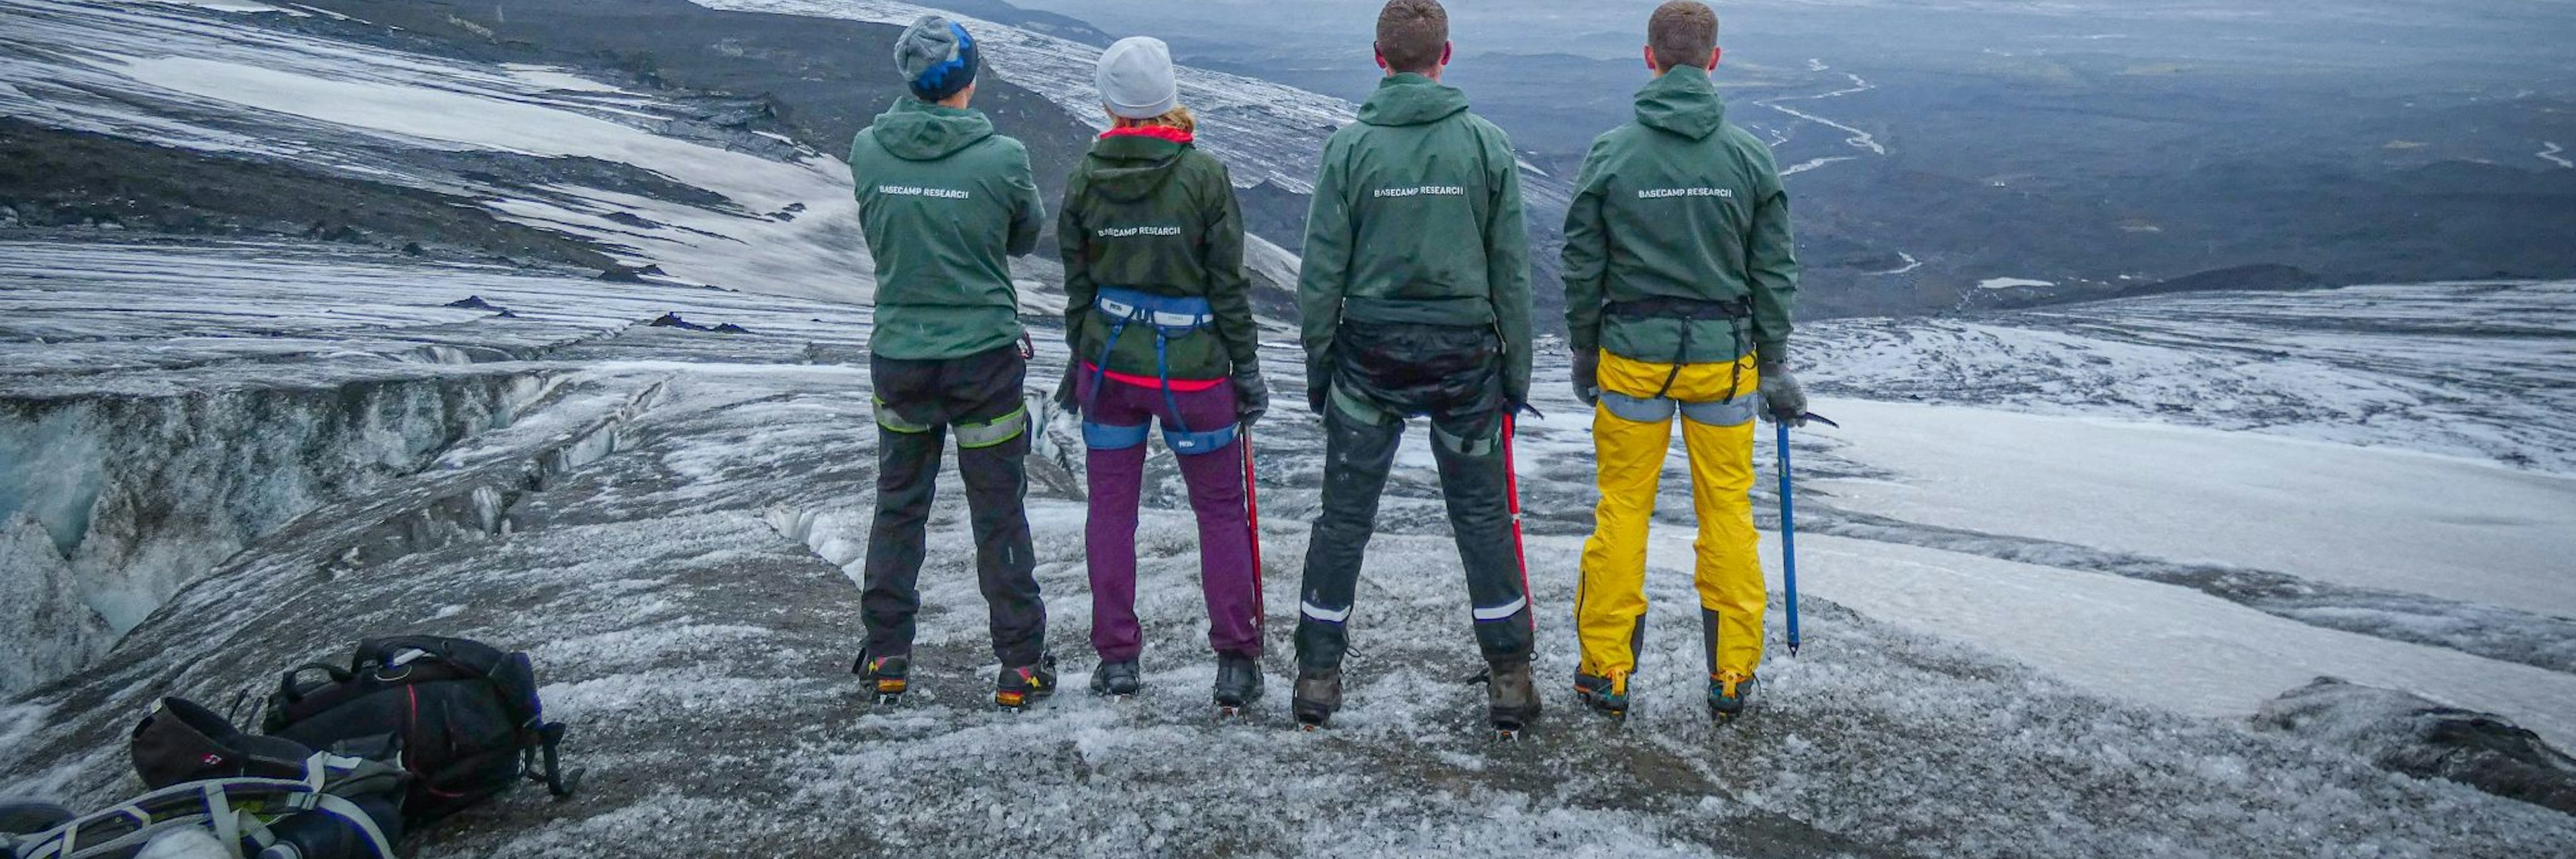 An image of the four members of the Basecamp team, facing away from the camera towards a snowy landscape